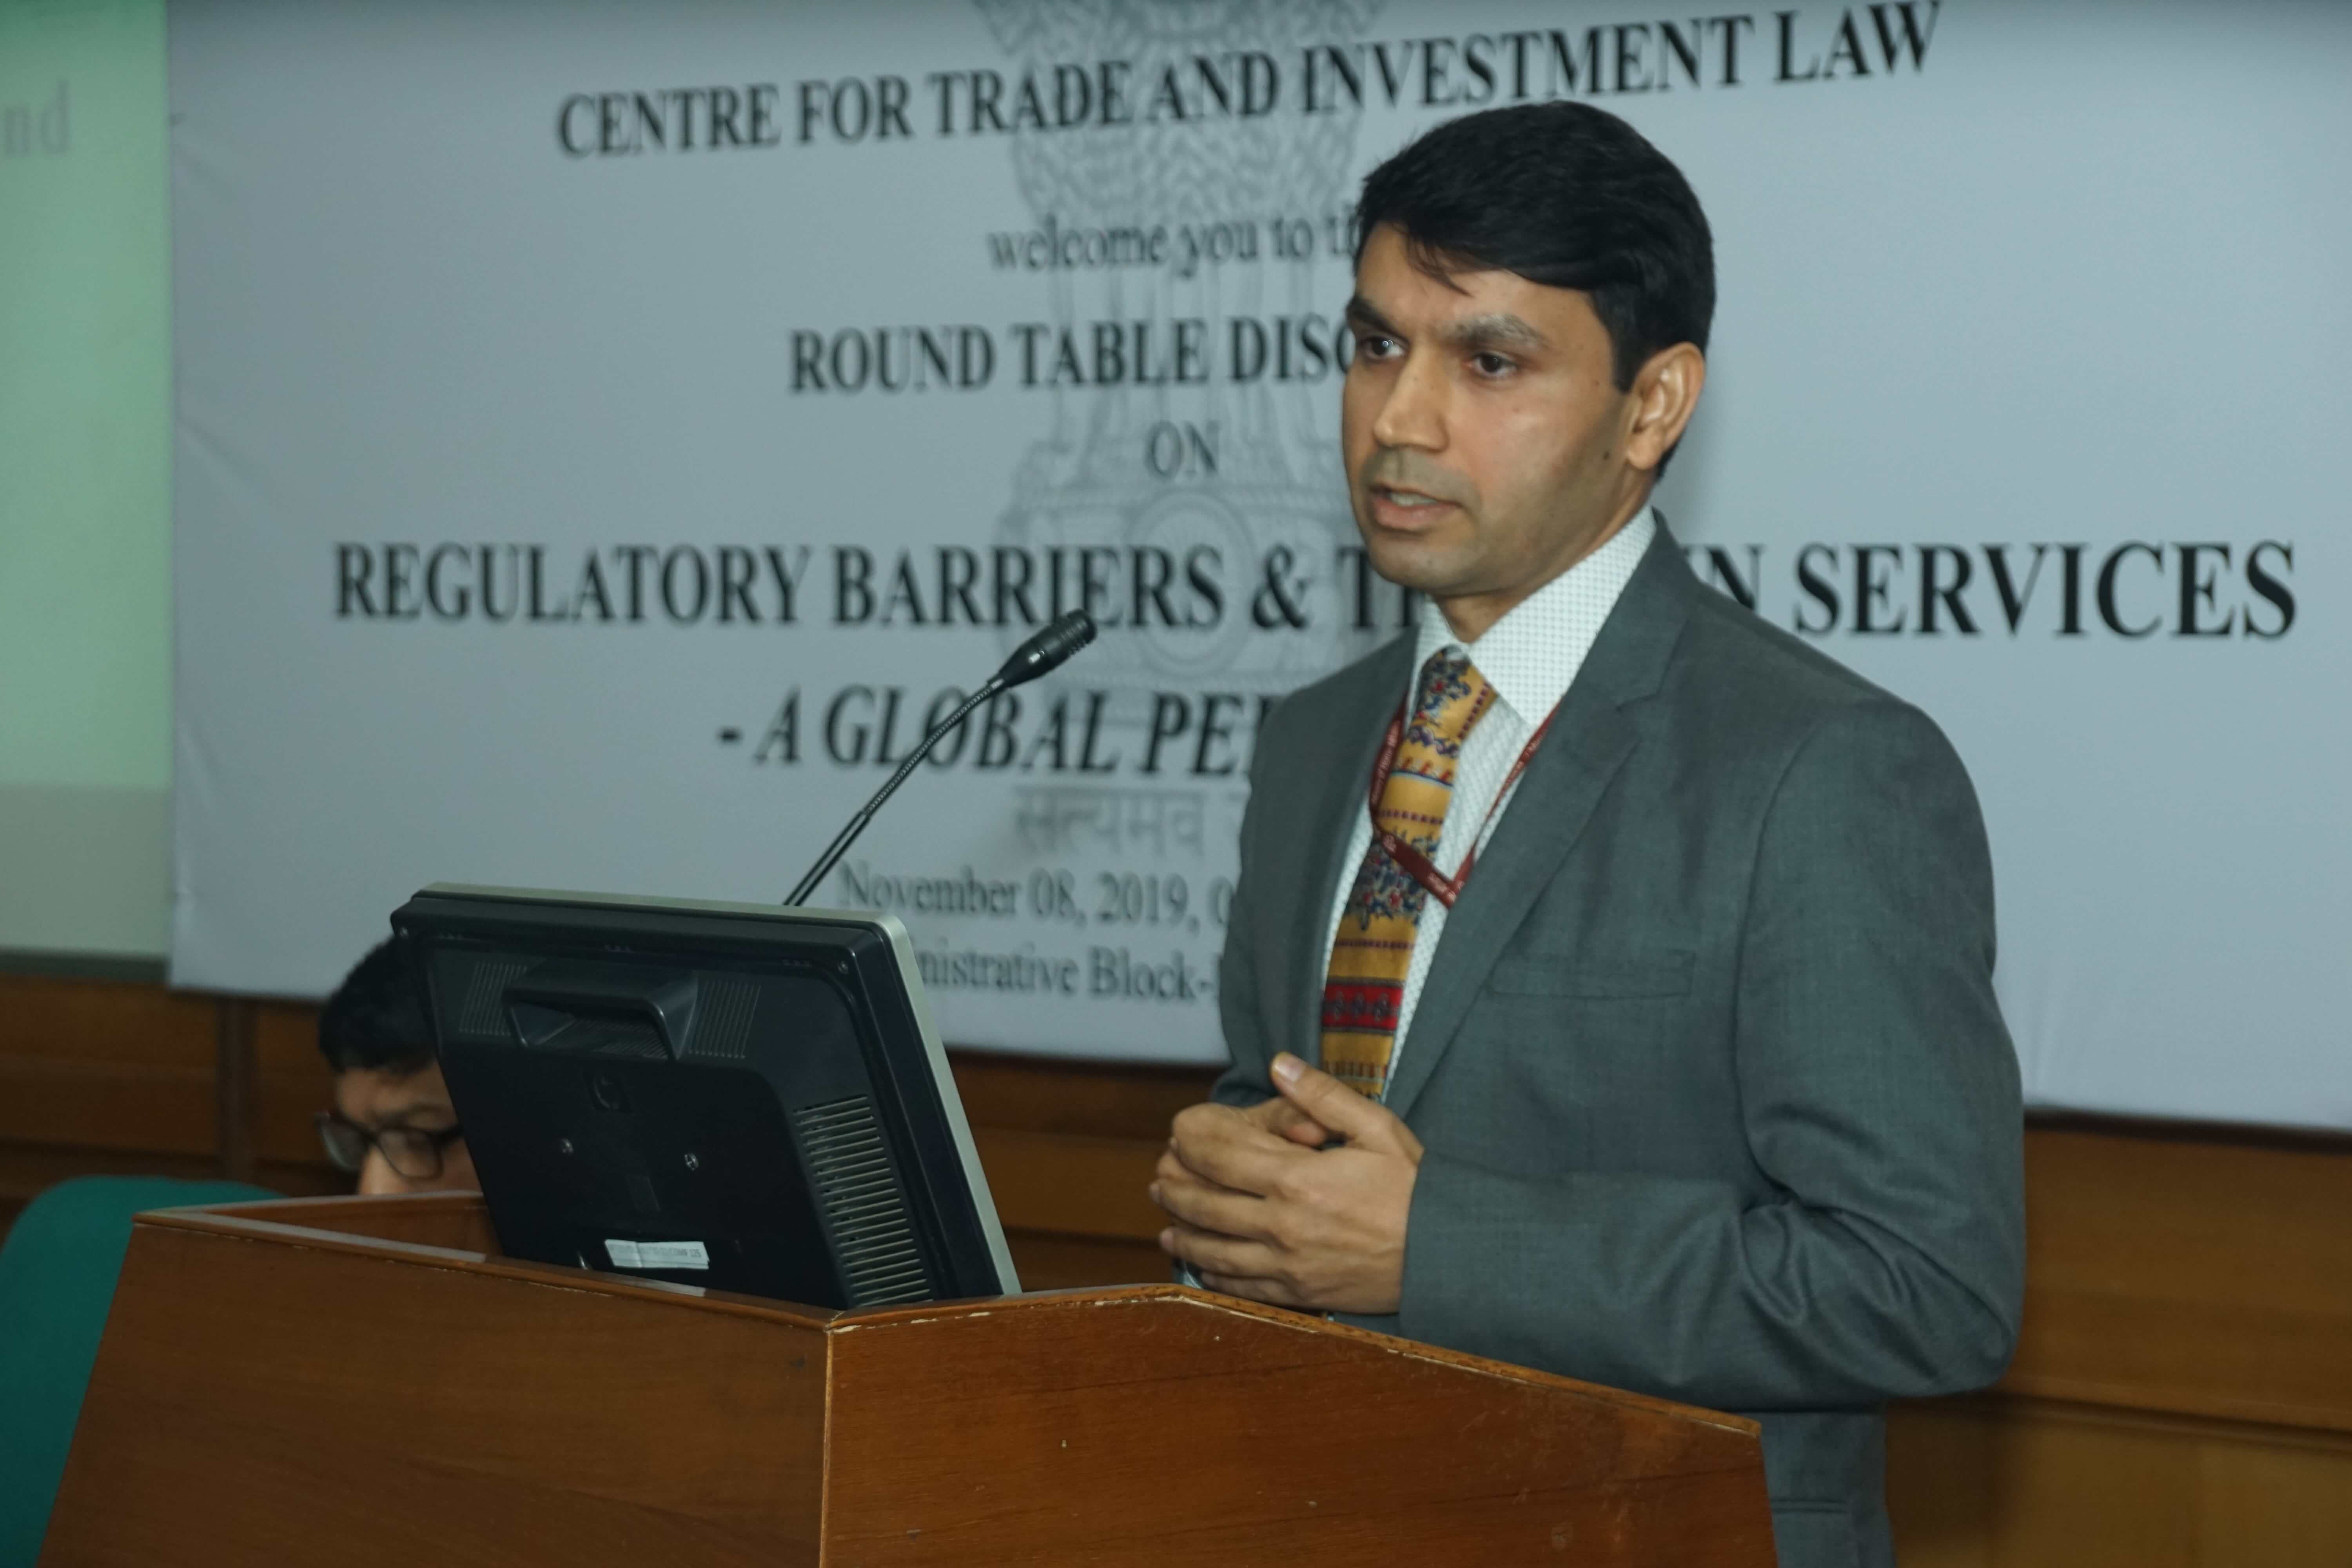 Mr. Darpan Jain, JS, DoC giving opening remarks on the discussion on Regulatory Barriers and Trade in Services